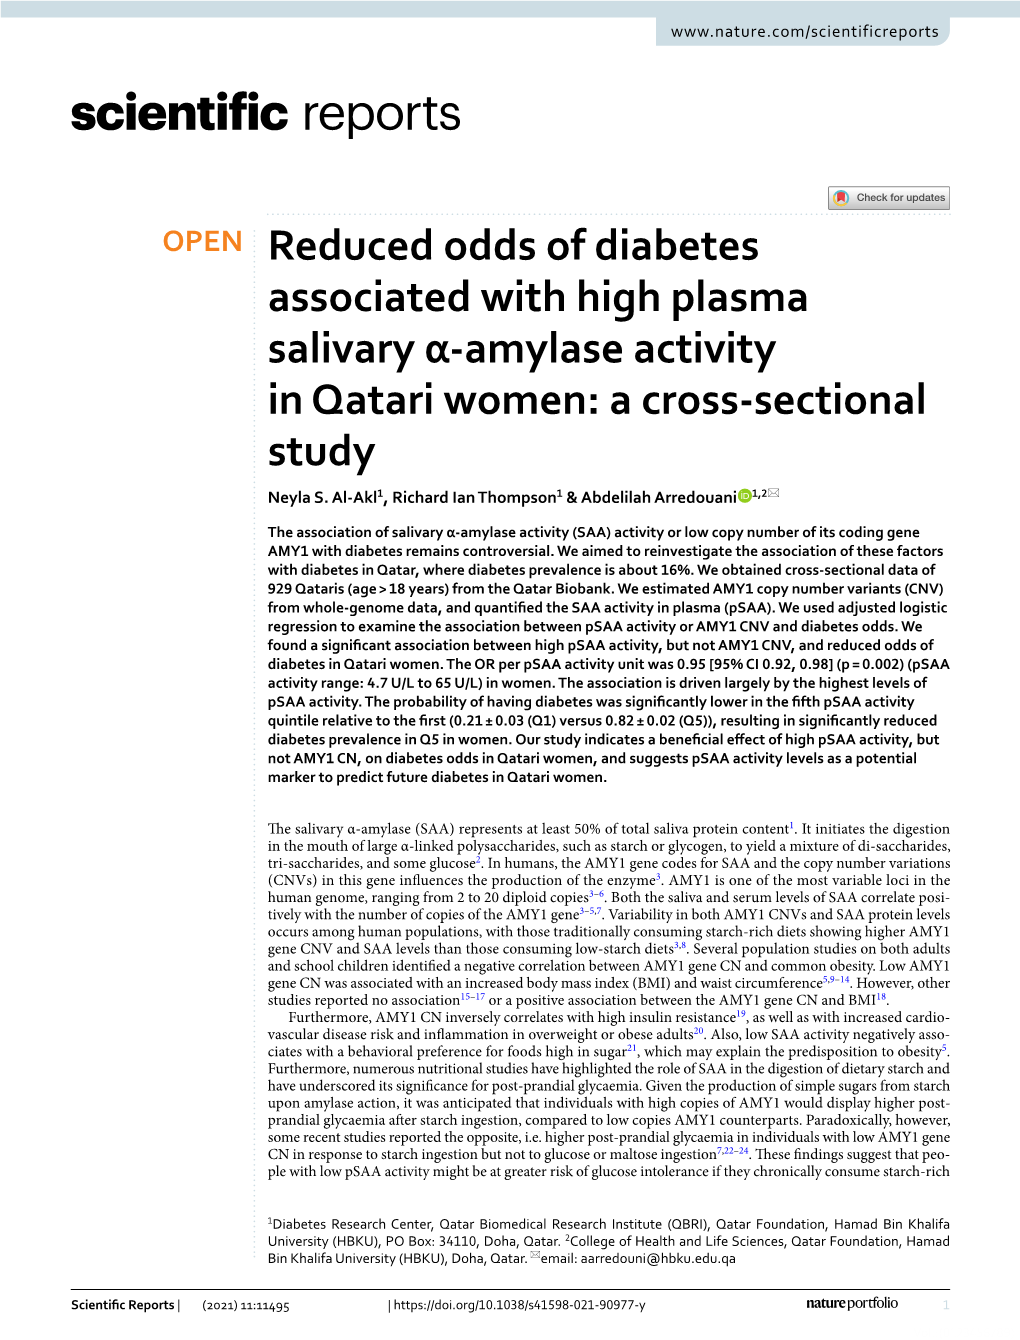 Reduced Odds of Diabetes Associated with High Plasma Salivary Α‑Amylase Activity in Qatari Women: a Cross‑Sectional Study Neyla S